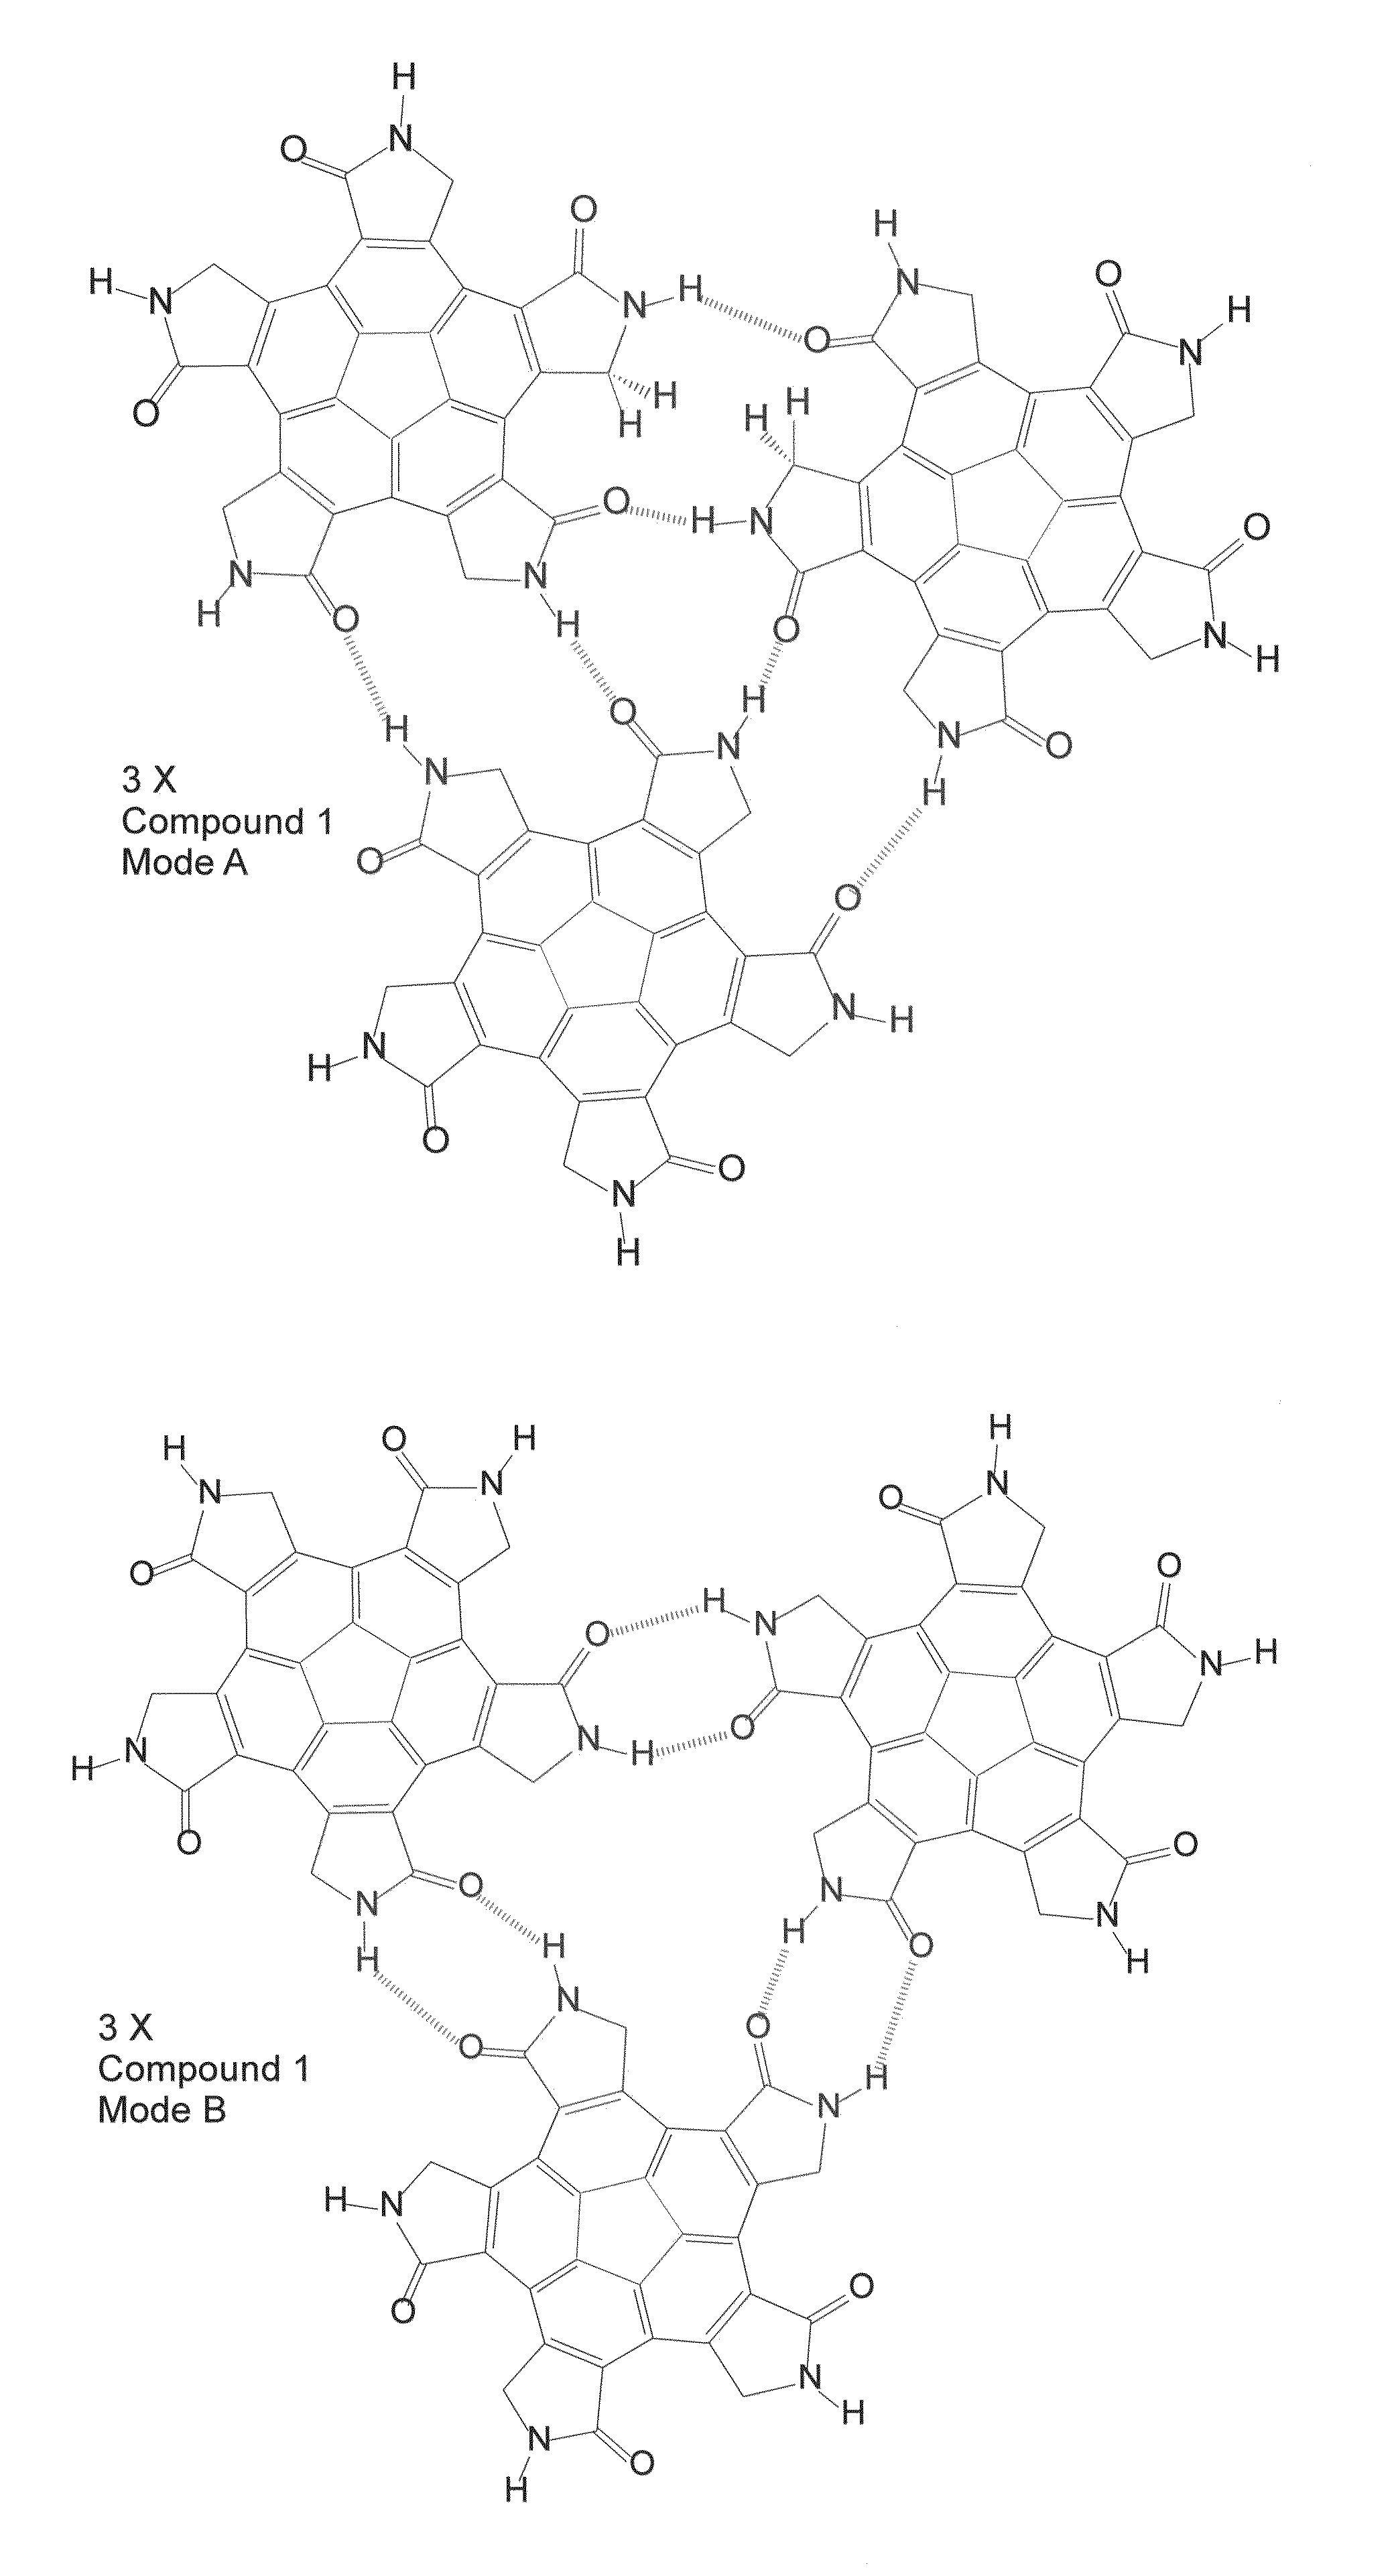 Self-assembled polyhedral multimeric chemical structures